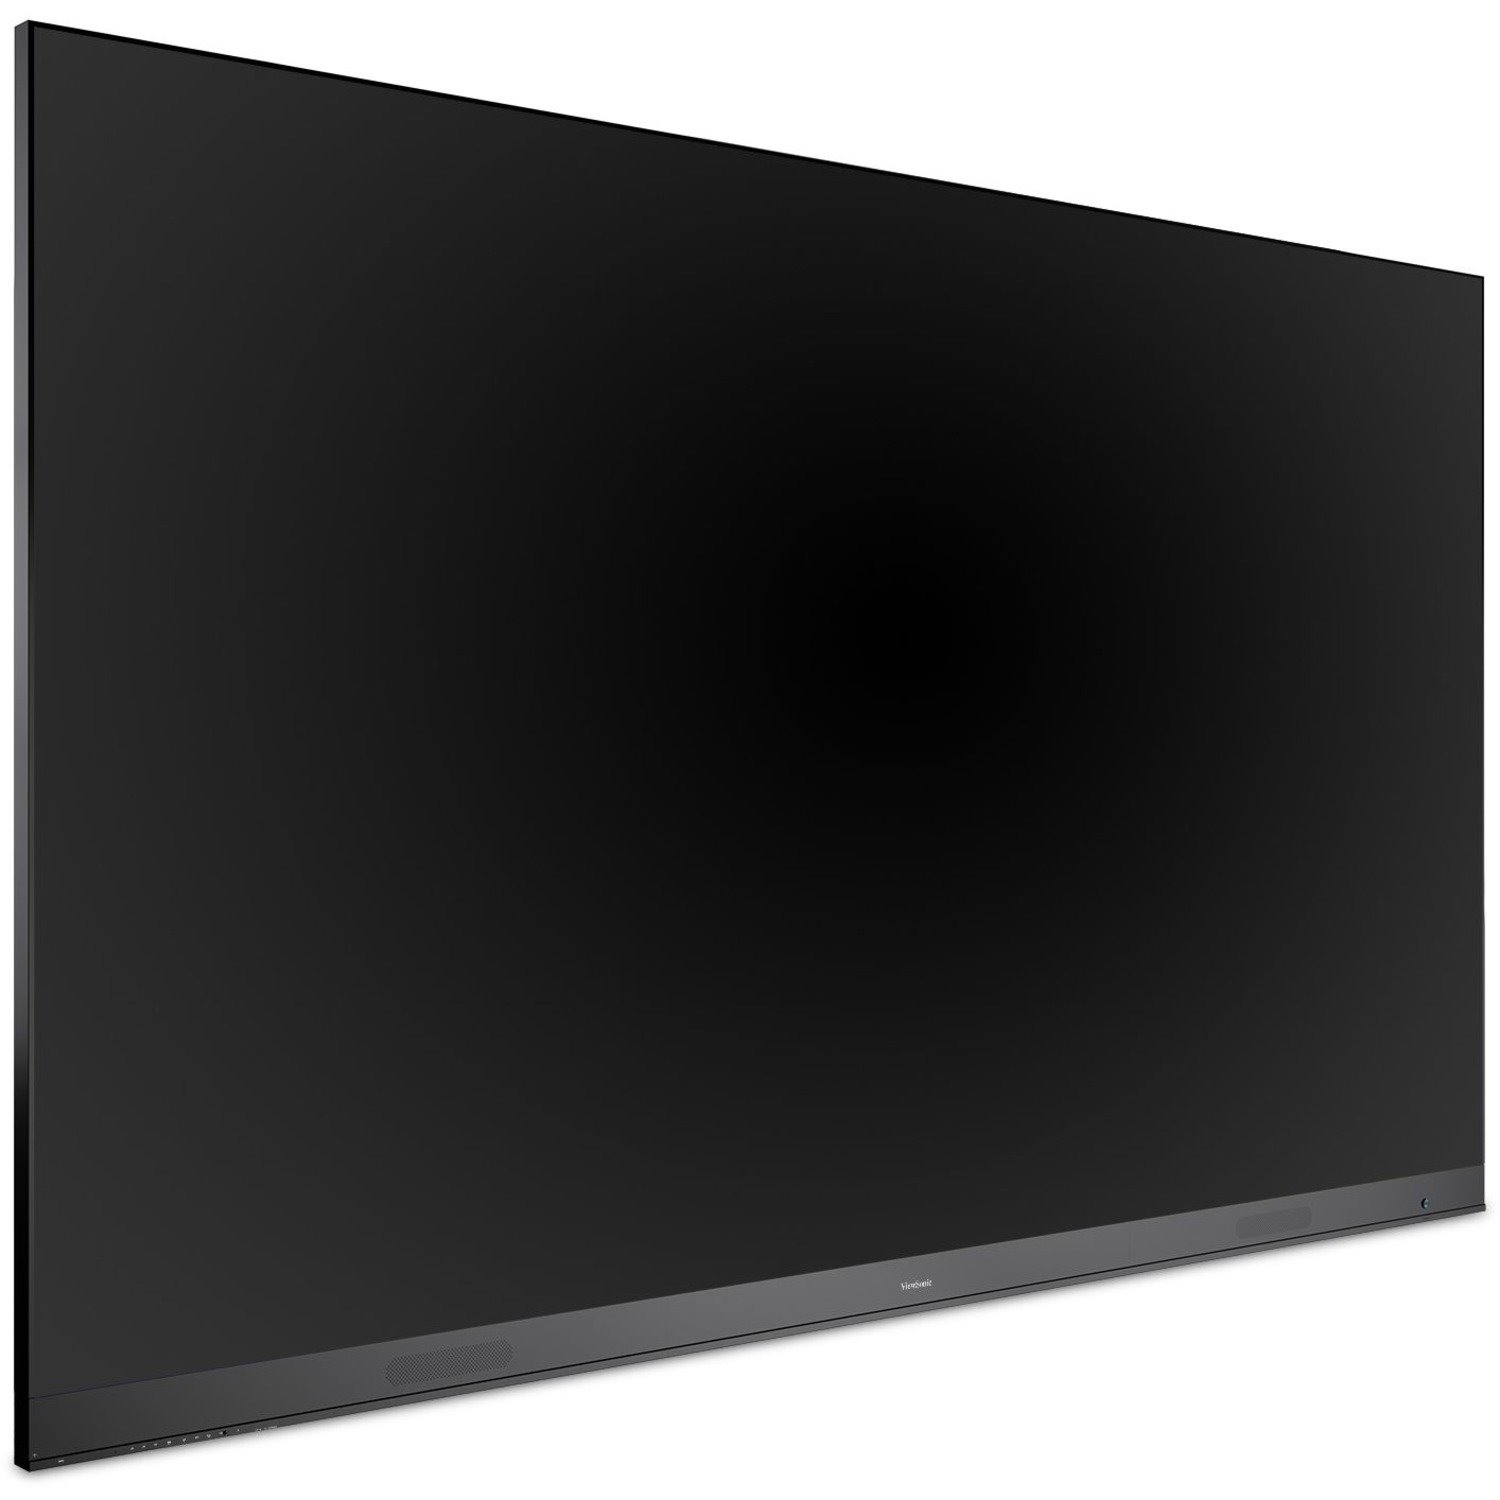 ViewSonic LDM163-181 163" dvLED All-in-One Direct View LED Display with 1920 x 1080 Resolution, 600-nit Brightness, 3,840Hz, 120% Rec.709, Harman Kardon Speakers